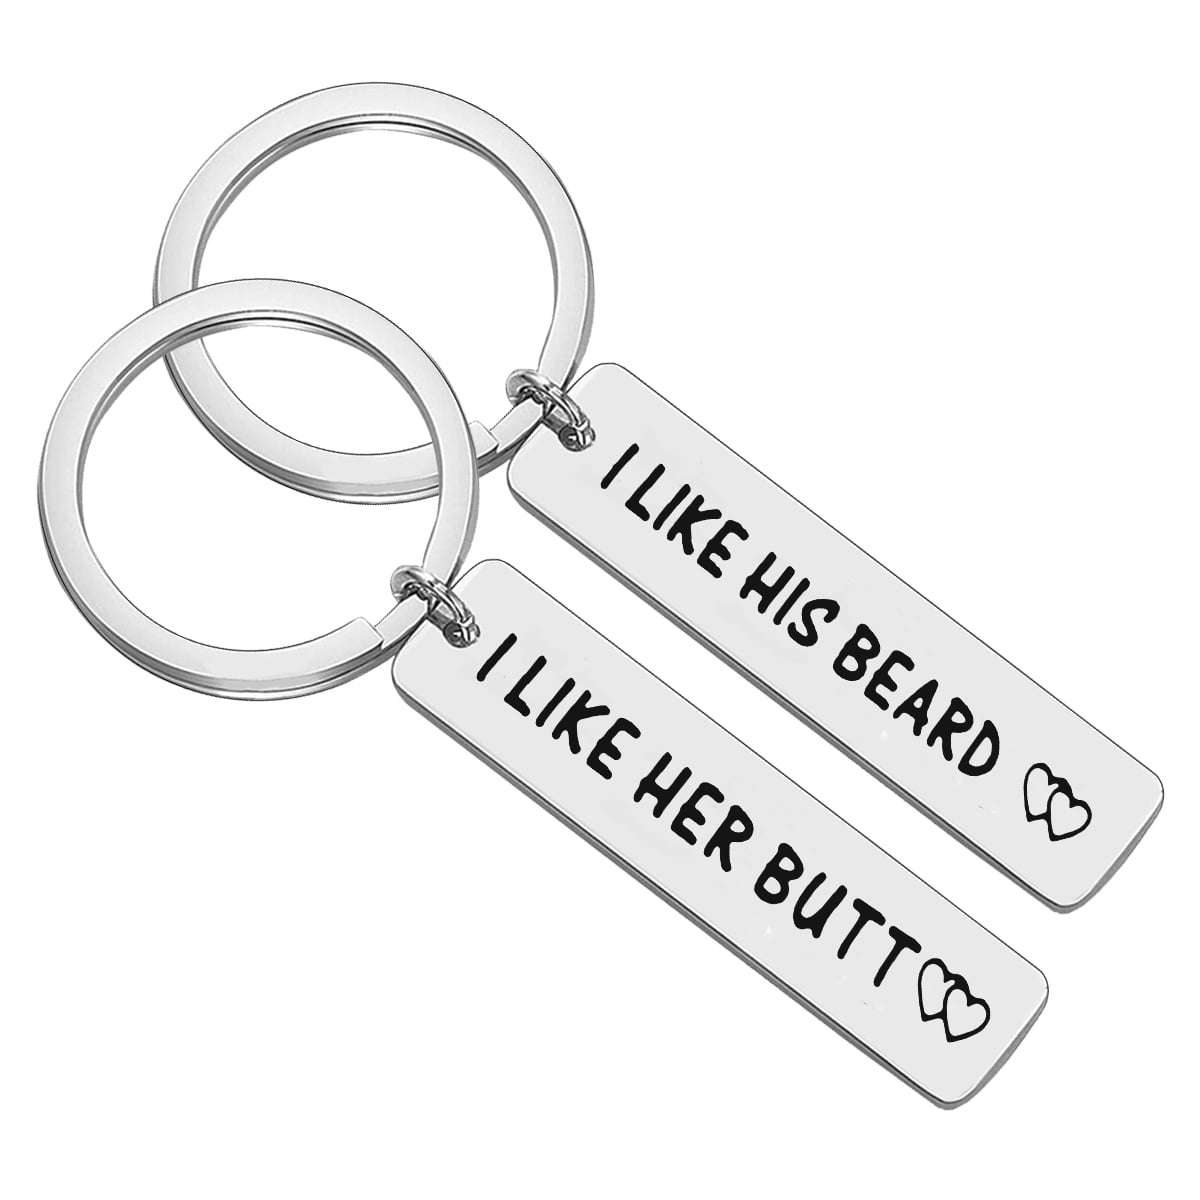 Couples Keychain Gifts for Girlfriend Boyfriend Wife Husband Lovers Couple Keychain Gift Im Hooked on You Youre My Best Catch Him Her Jewelry Birthday Christmas Valentines Day Anniversary Wedding